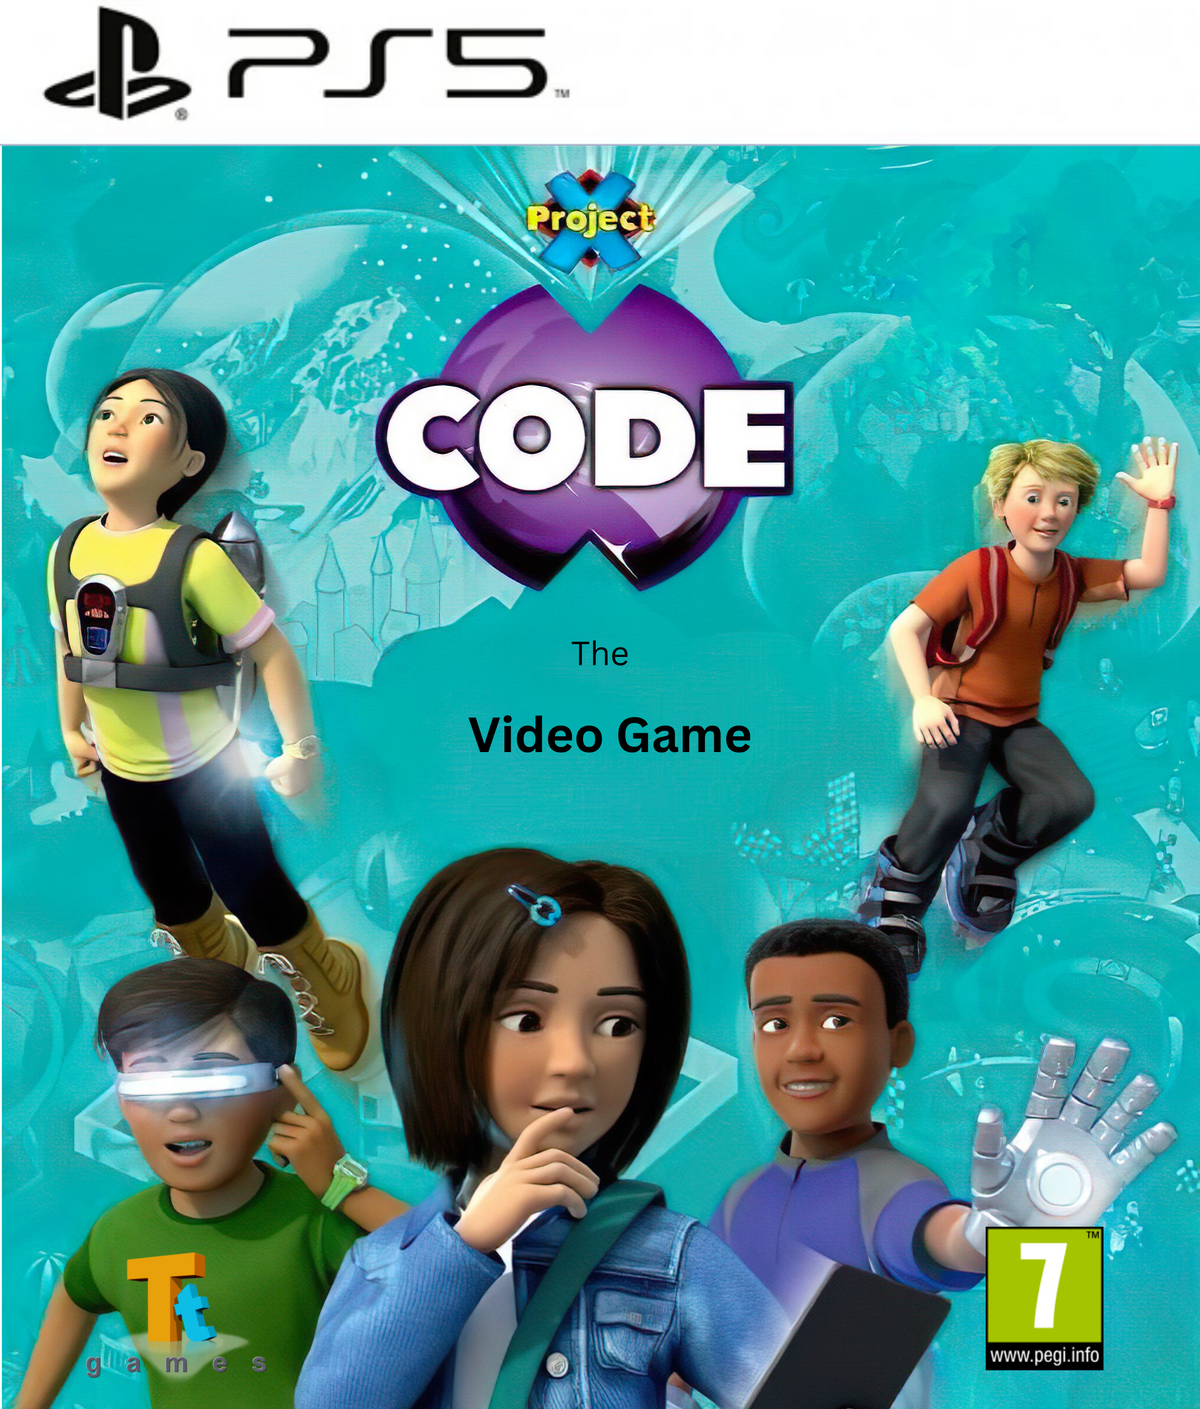 Codes / X GAME